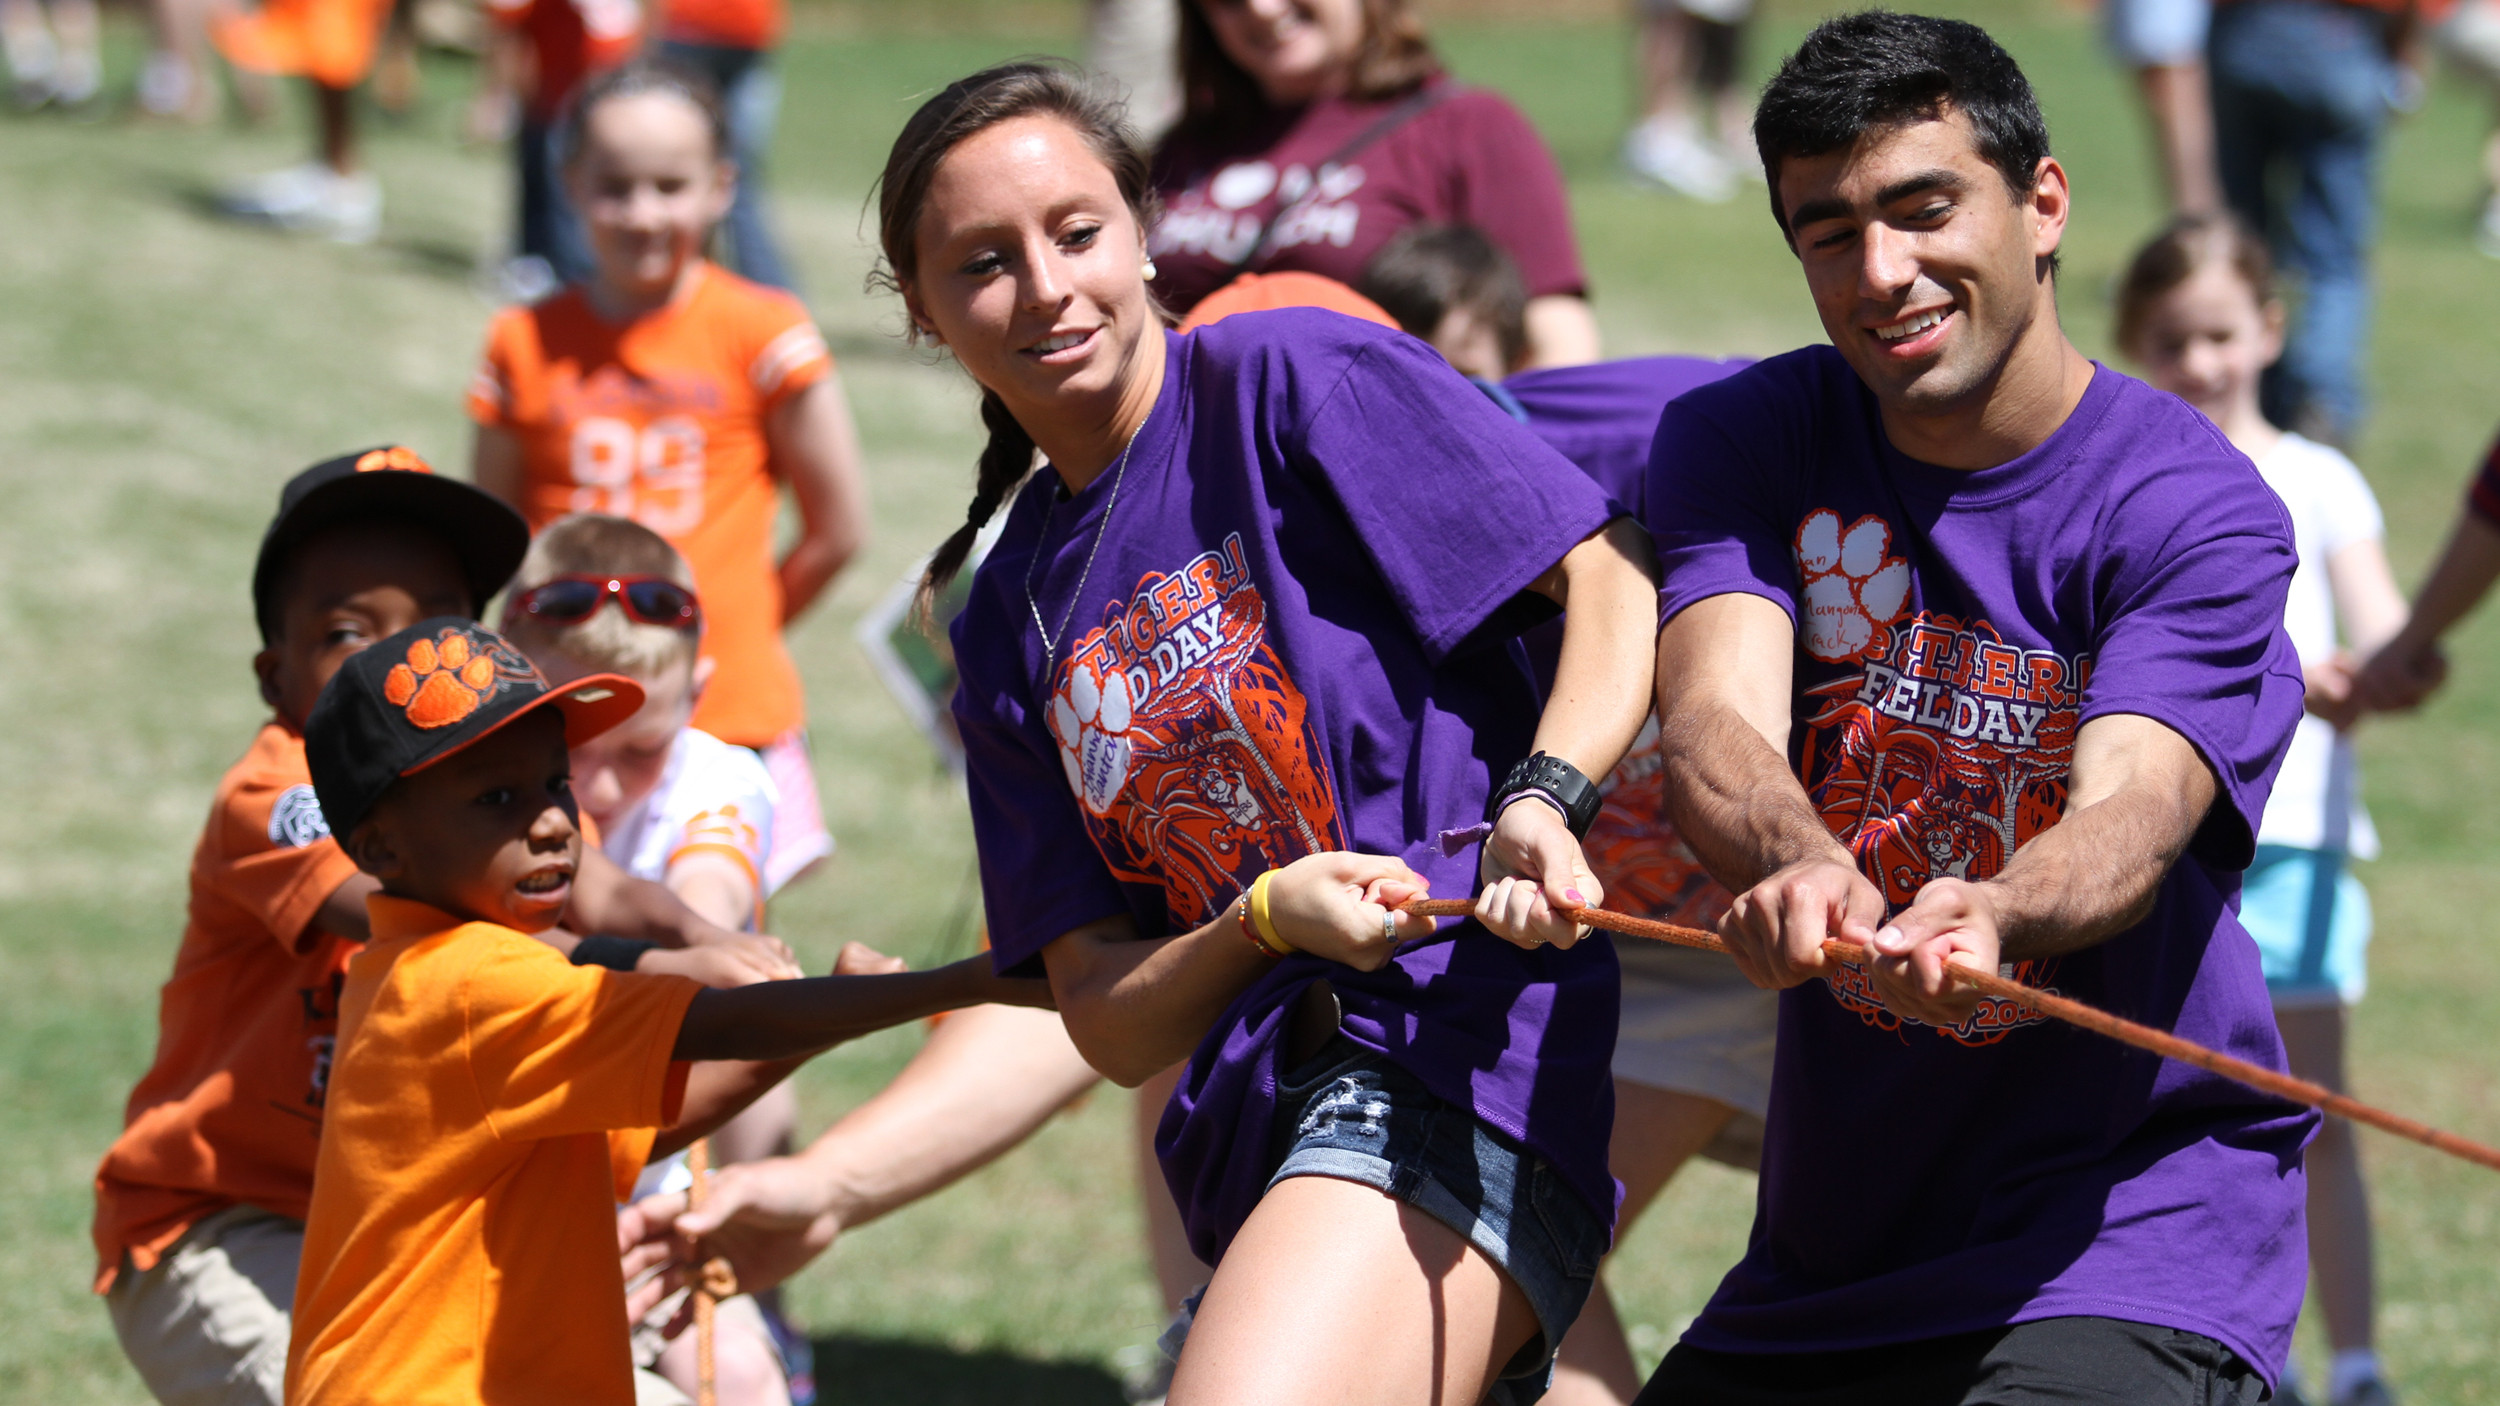 Clemson Community Relations Video: Be a T.I.G.E.R! Field Day 2013